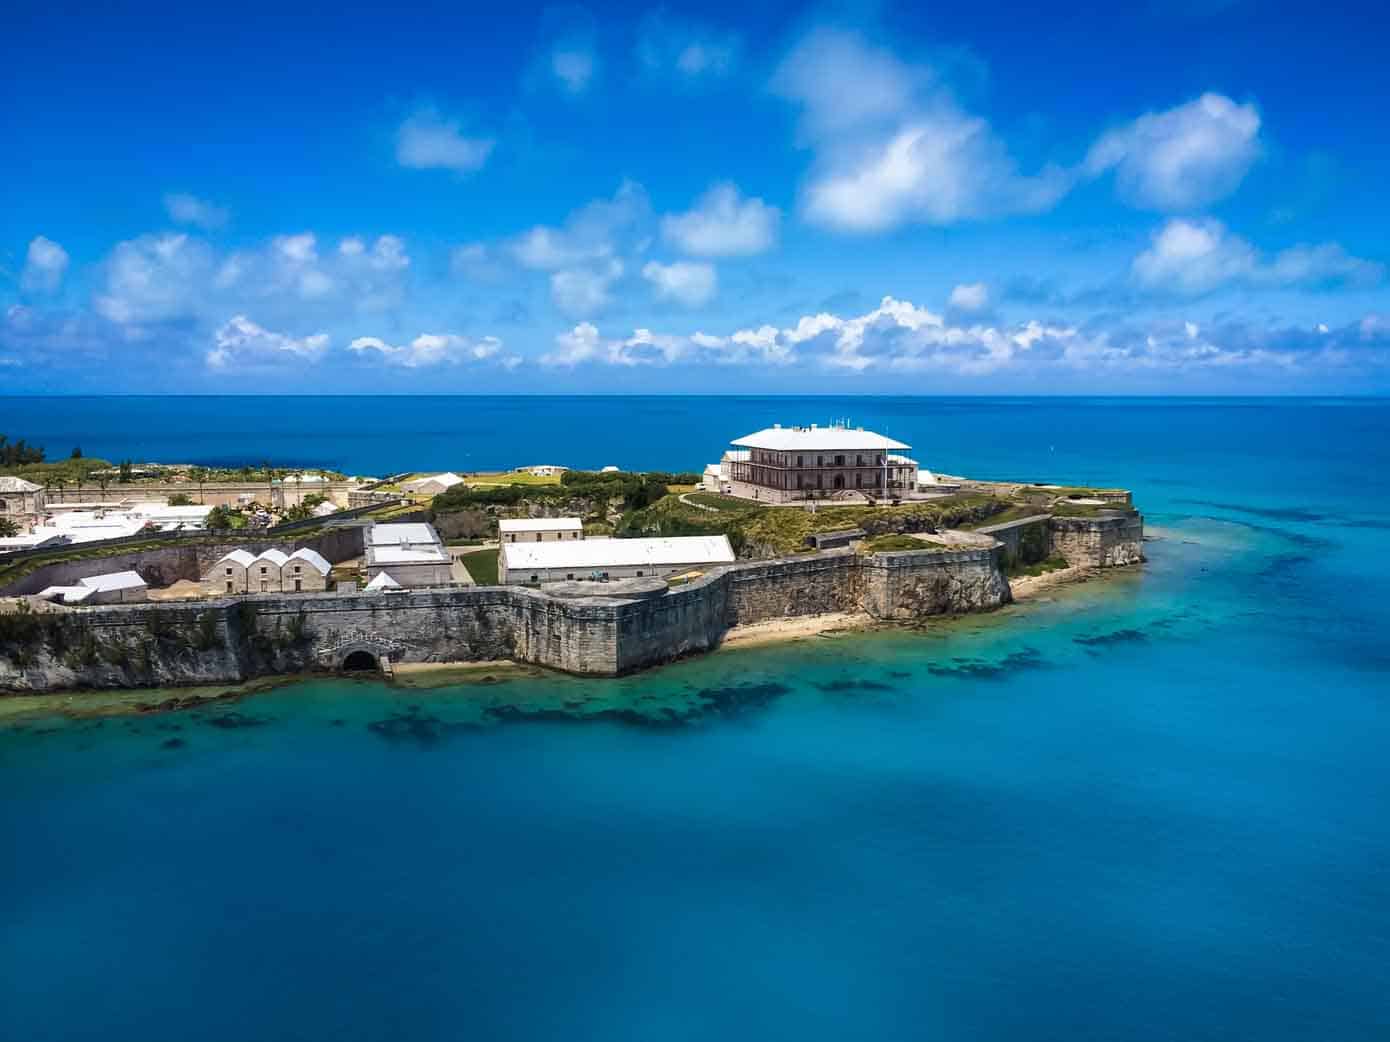 Old fortress called Royal Naval Dockyard in Bermuda jetting into a beautiful blue ocean.